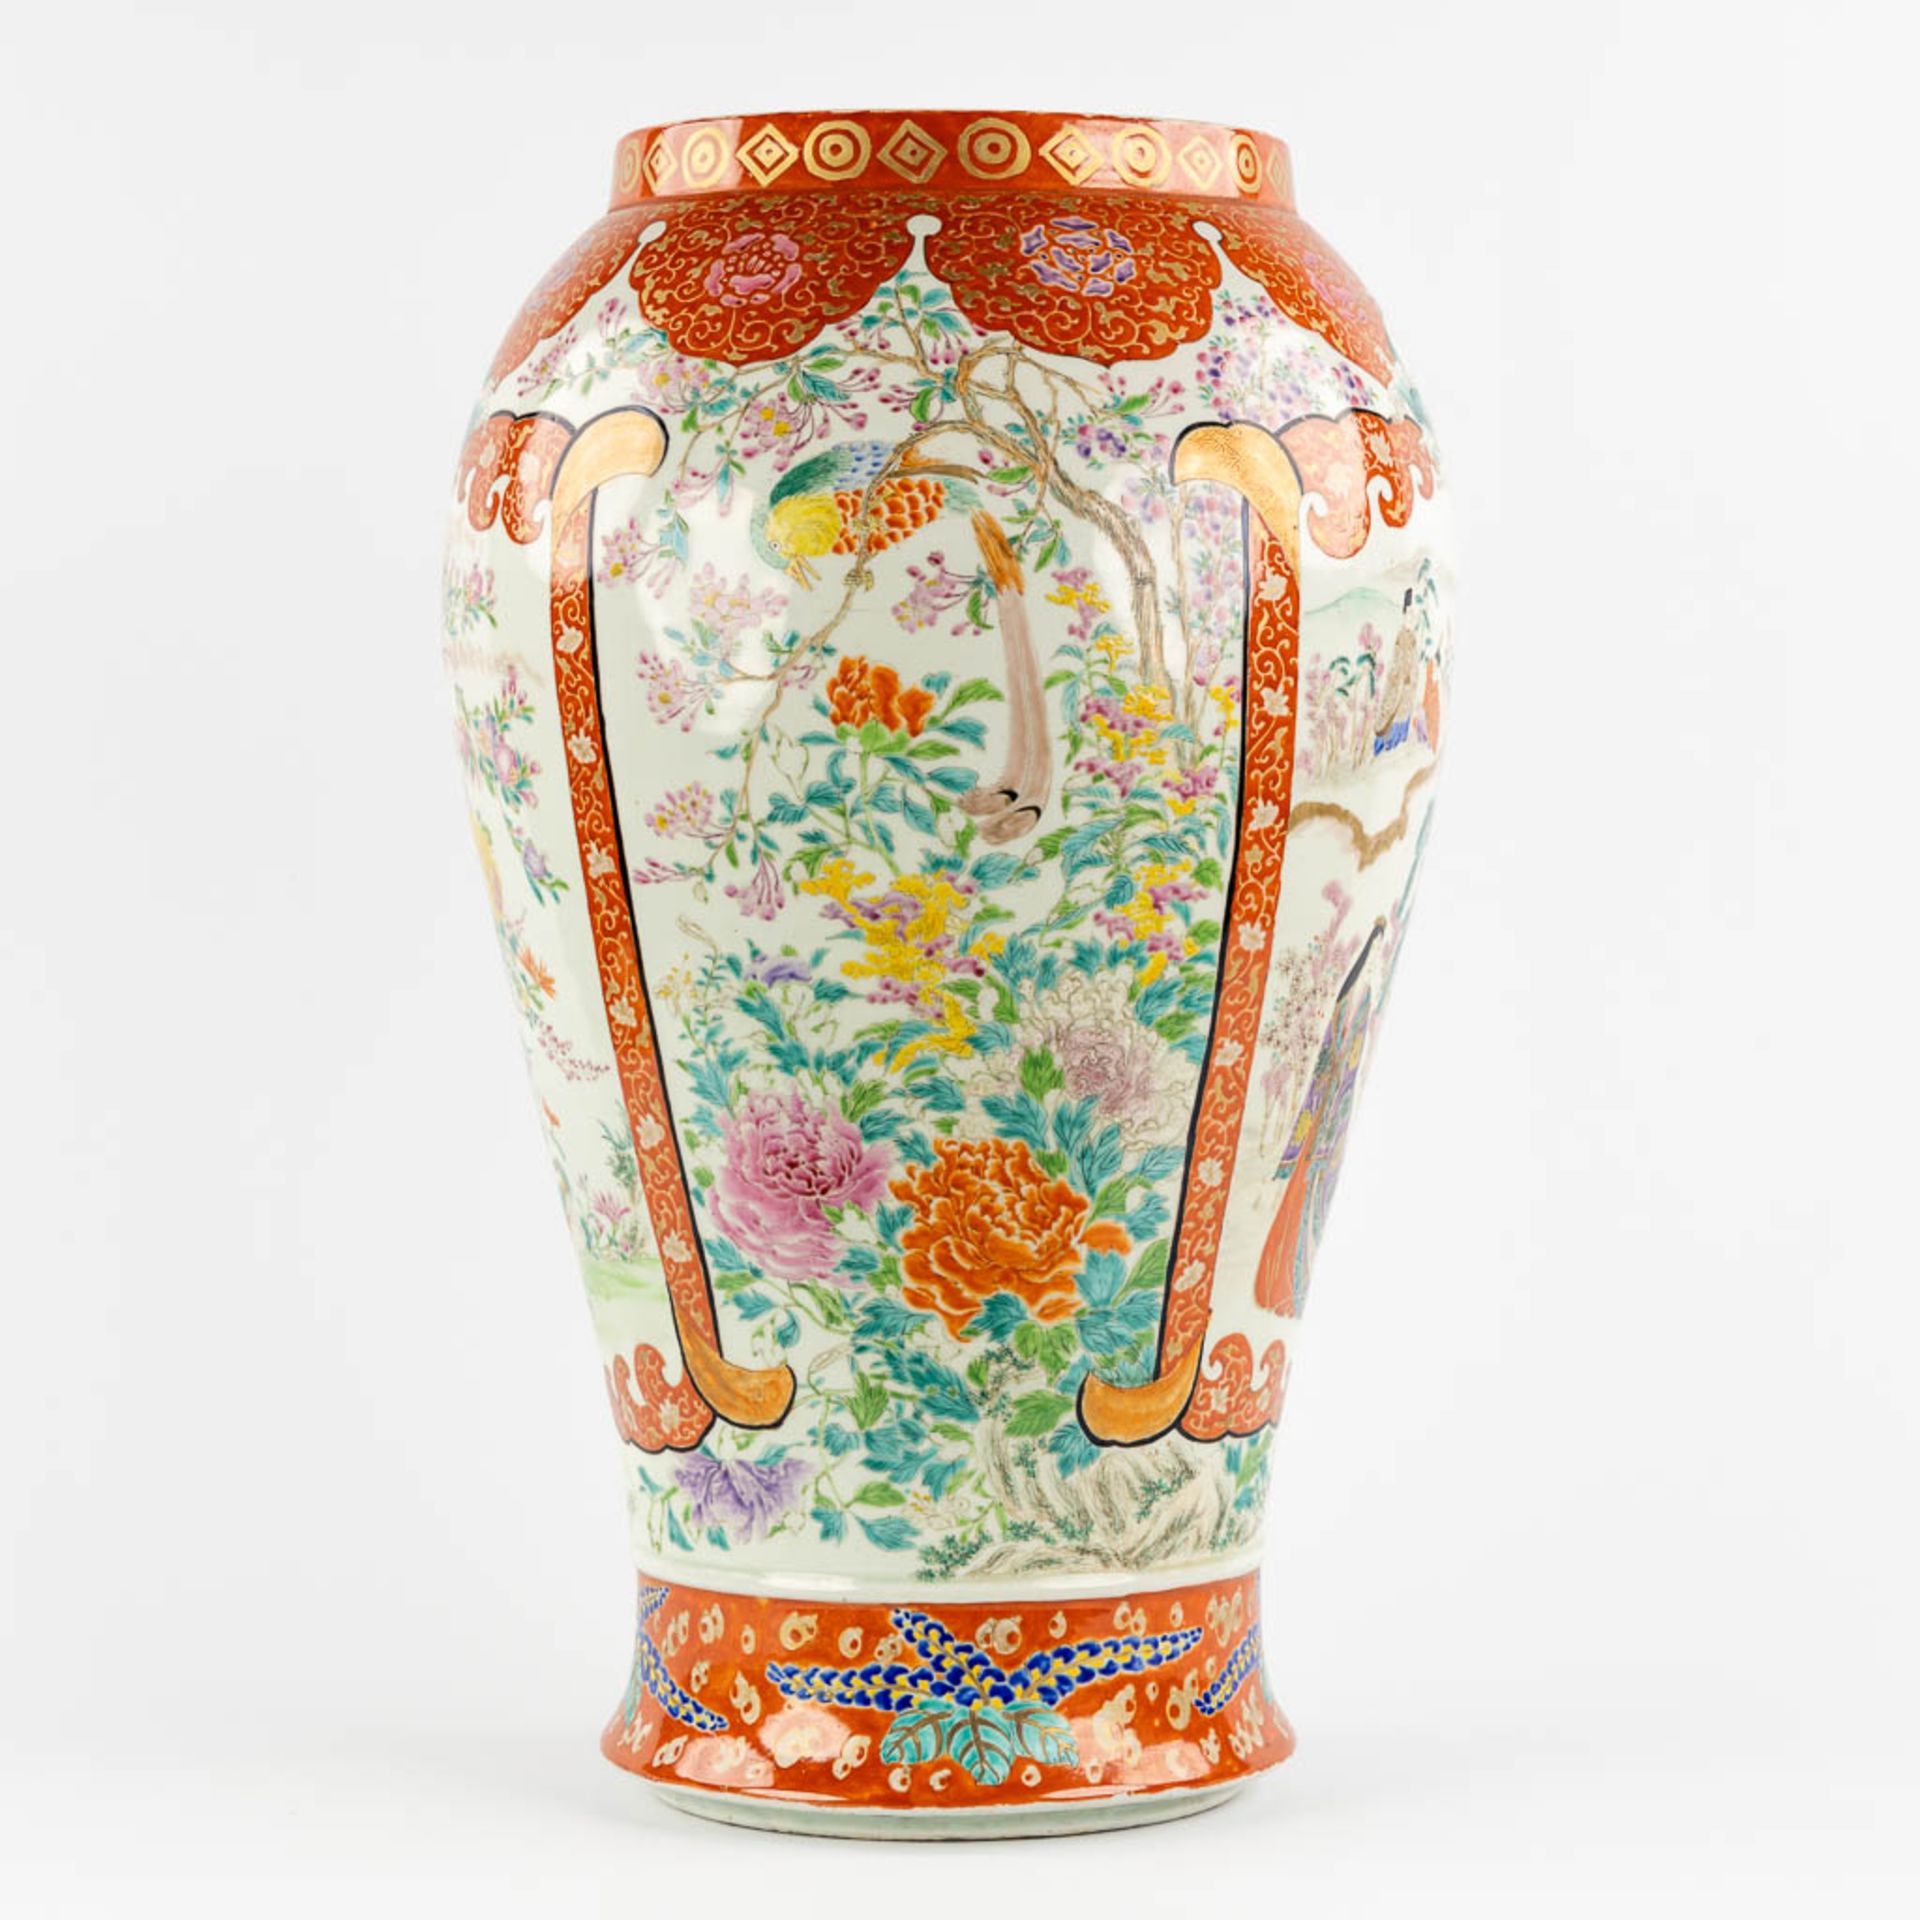 A large Japanese Kutani vase, decorated with fauna and flora. 19th C. (H:61 x D:38 cm) - Image 5 of 13